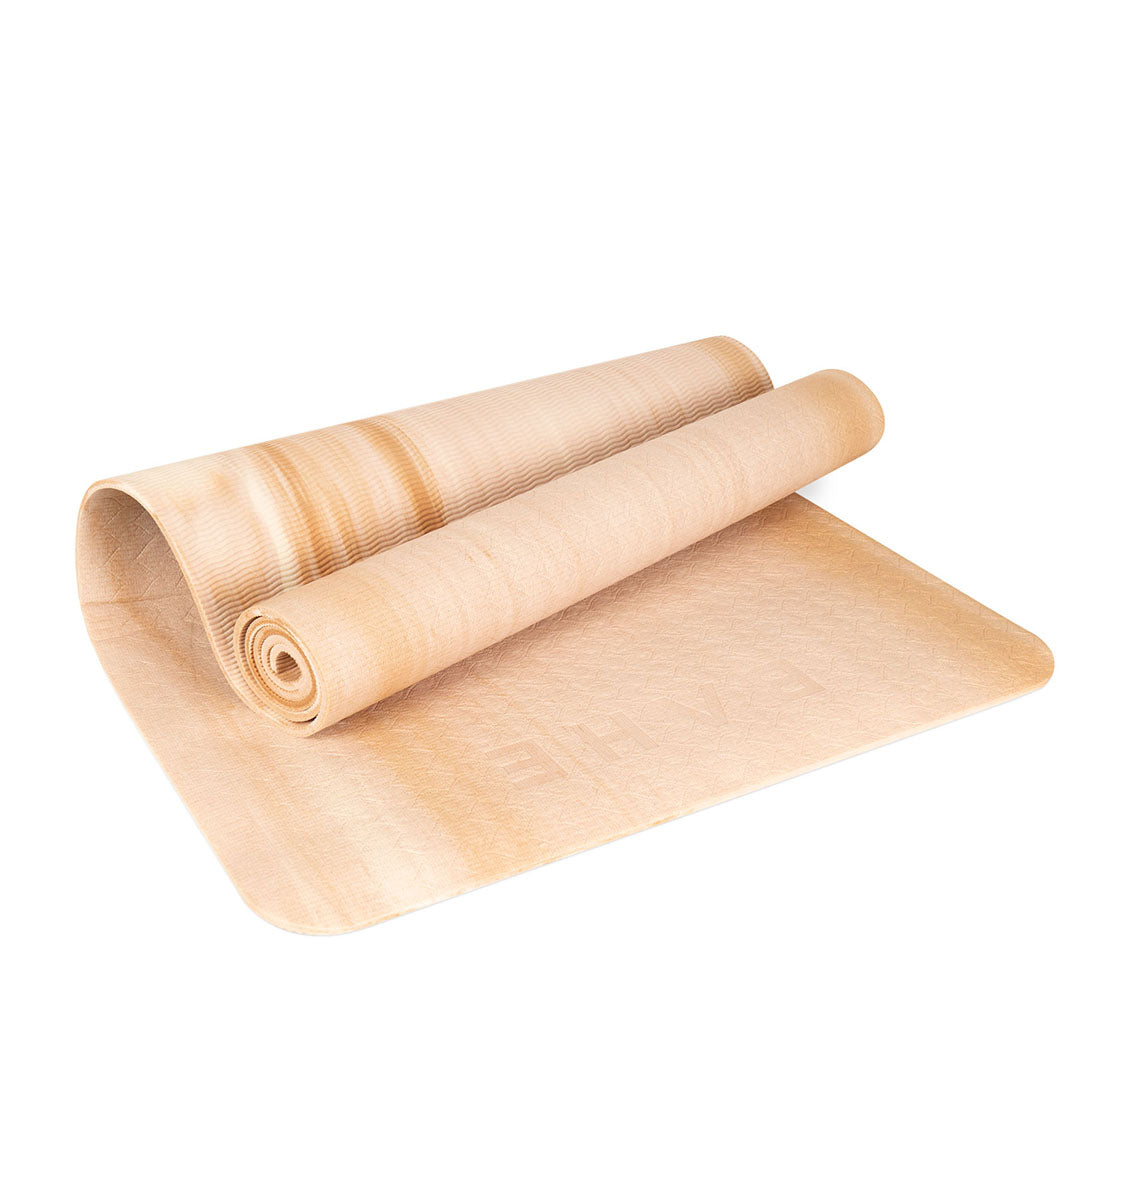 BAHE Prime Support Marble Yoga Mat - 6mm - Dusty Beige Marble - 2